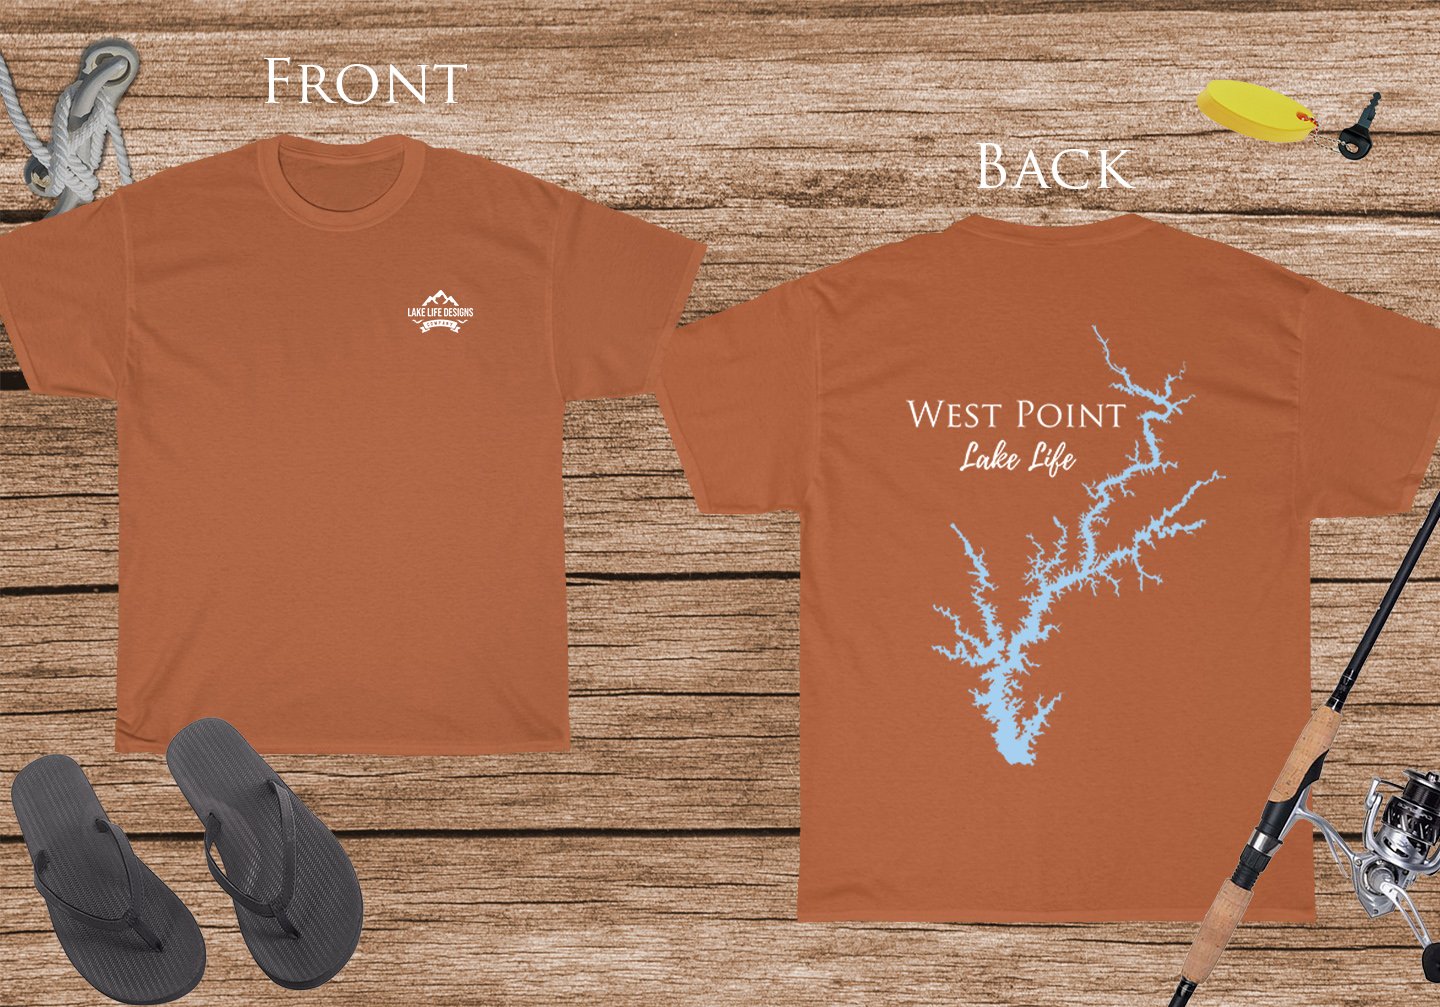 West Point Lake Life - Cotton Short Sleeved - FRONT & BACK PRINTED - Short Sleeved Cotton Tee - Georgia Lake